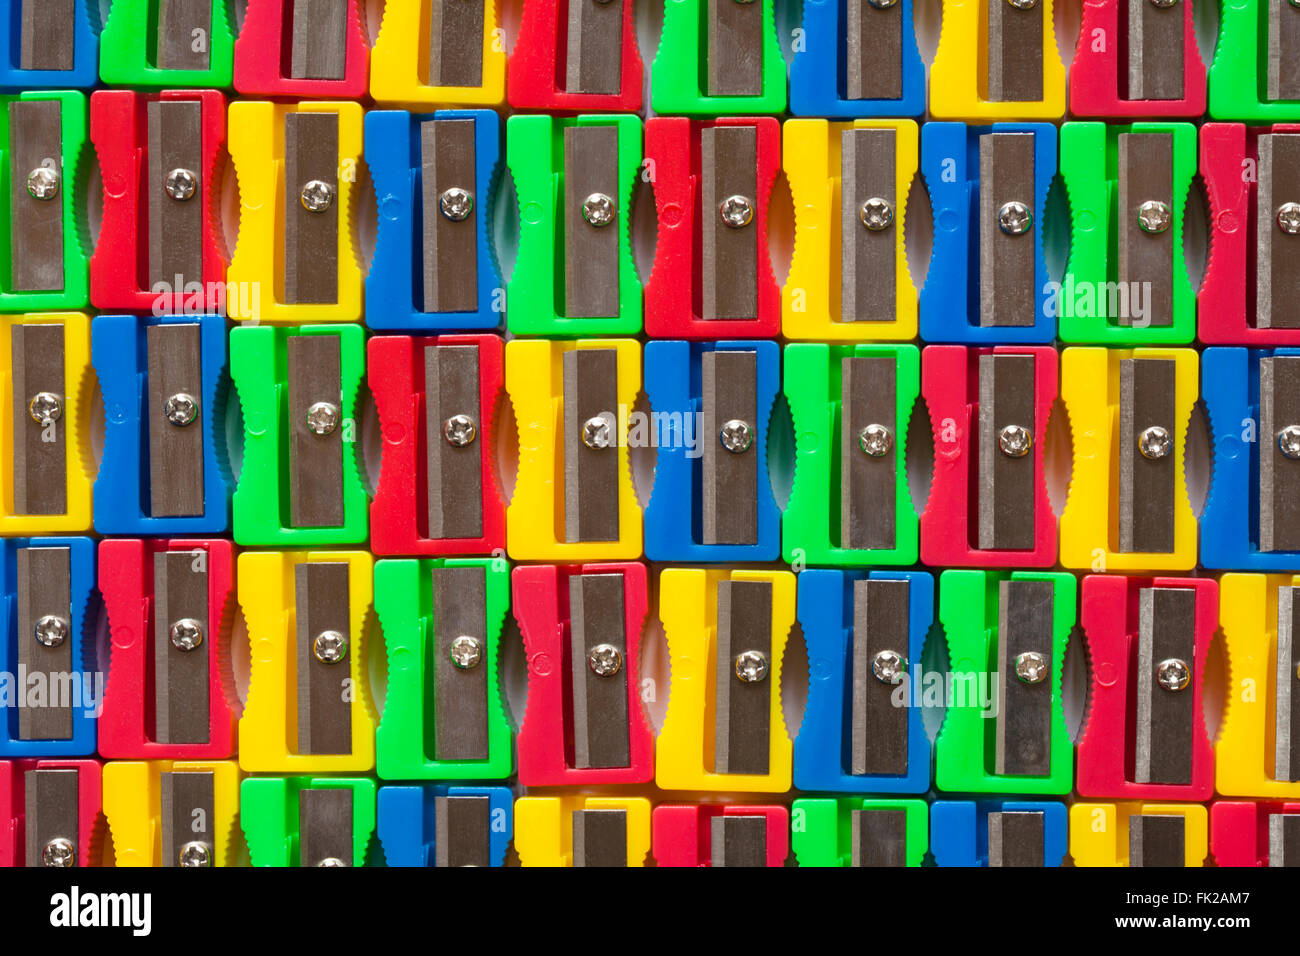 Rows of colourful red, yellow, green and blue plastic pencil sharpeners Stock Photo